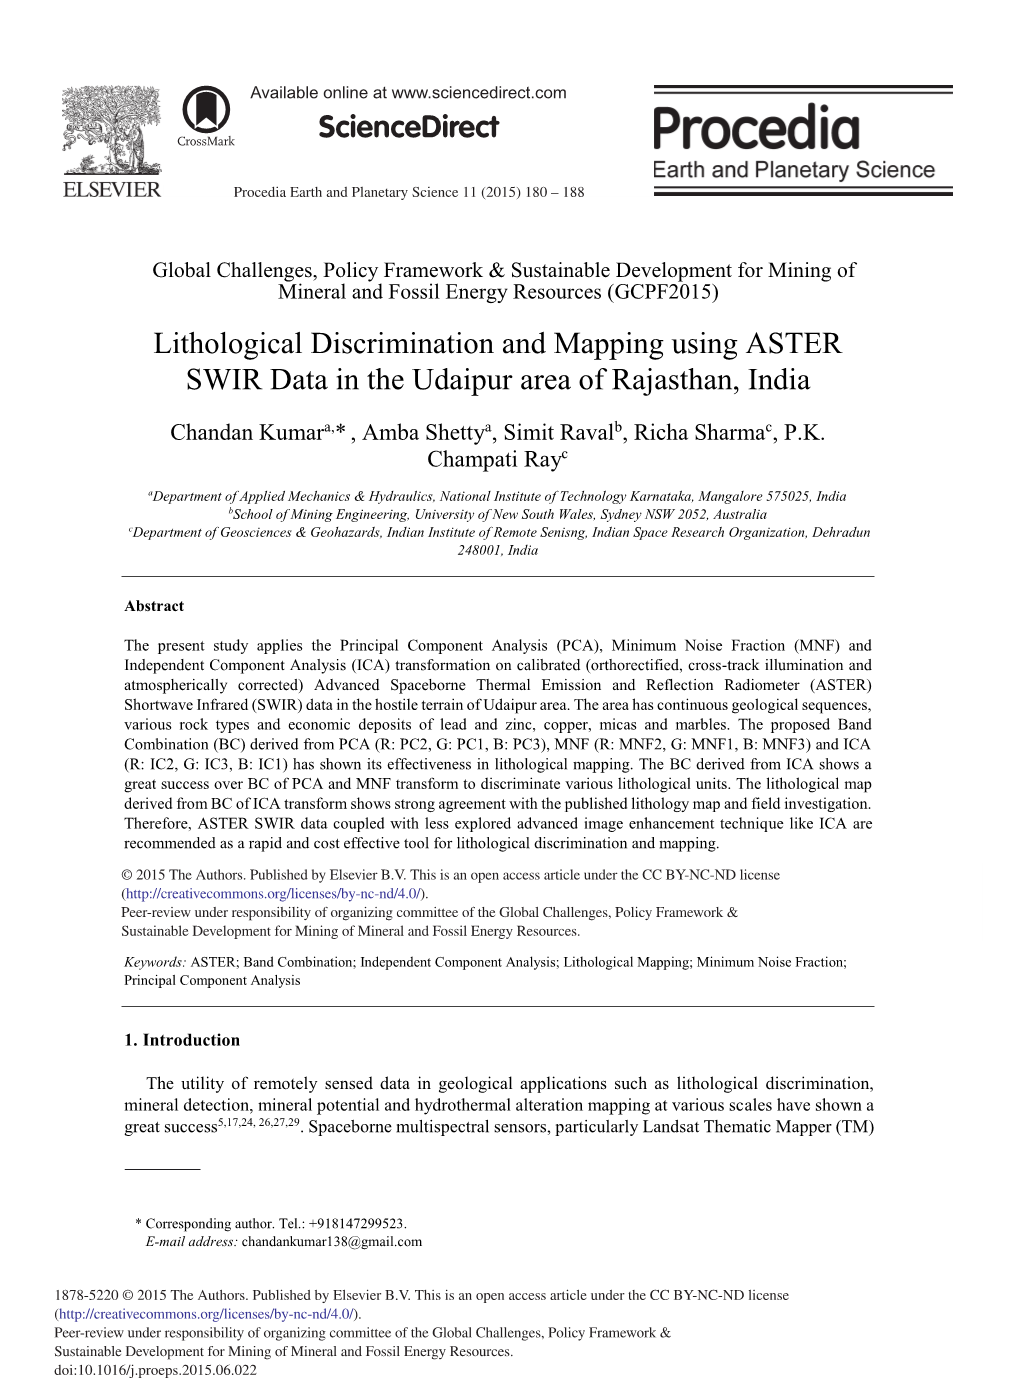 Lithological Discrimination and Mapping Using ASTER SWIR Data in the Udaipur Area of Rajasthan, India